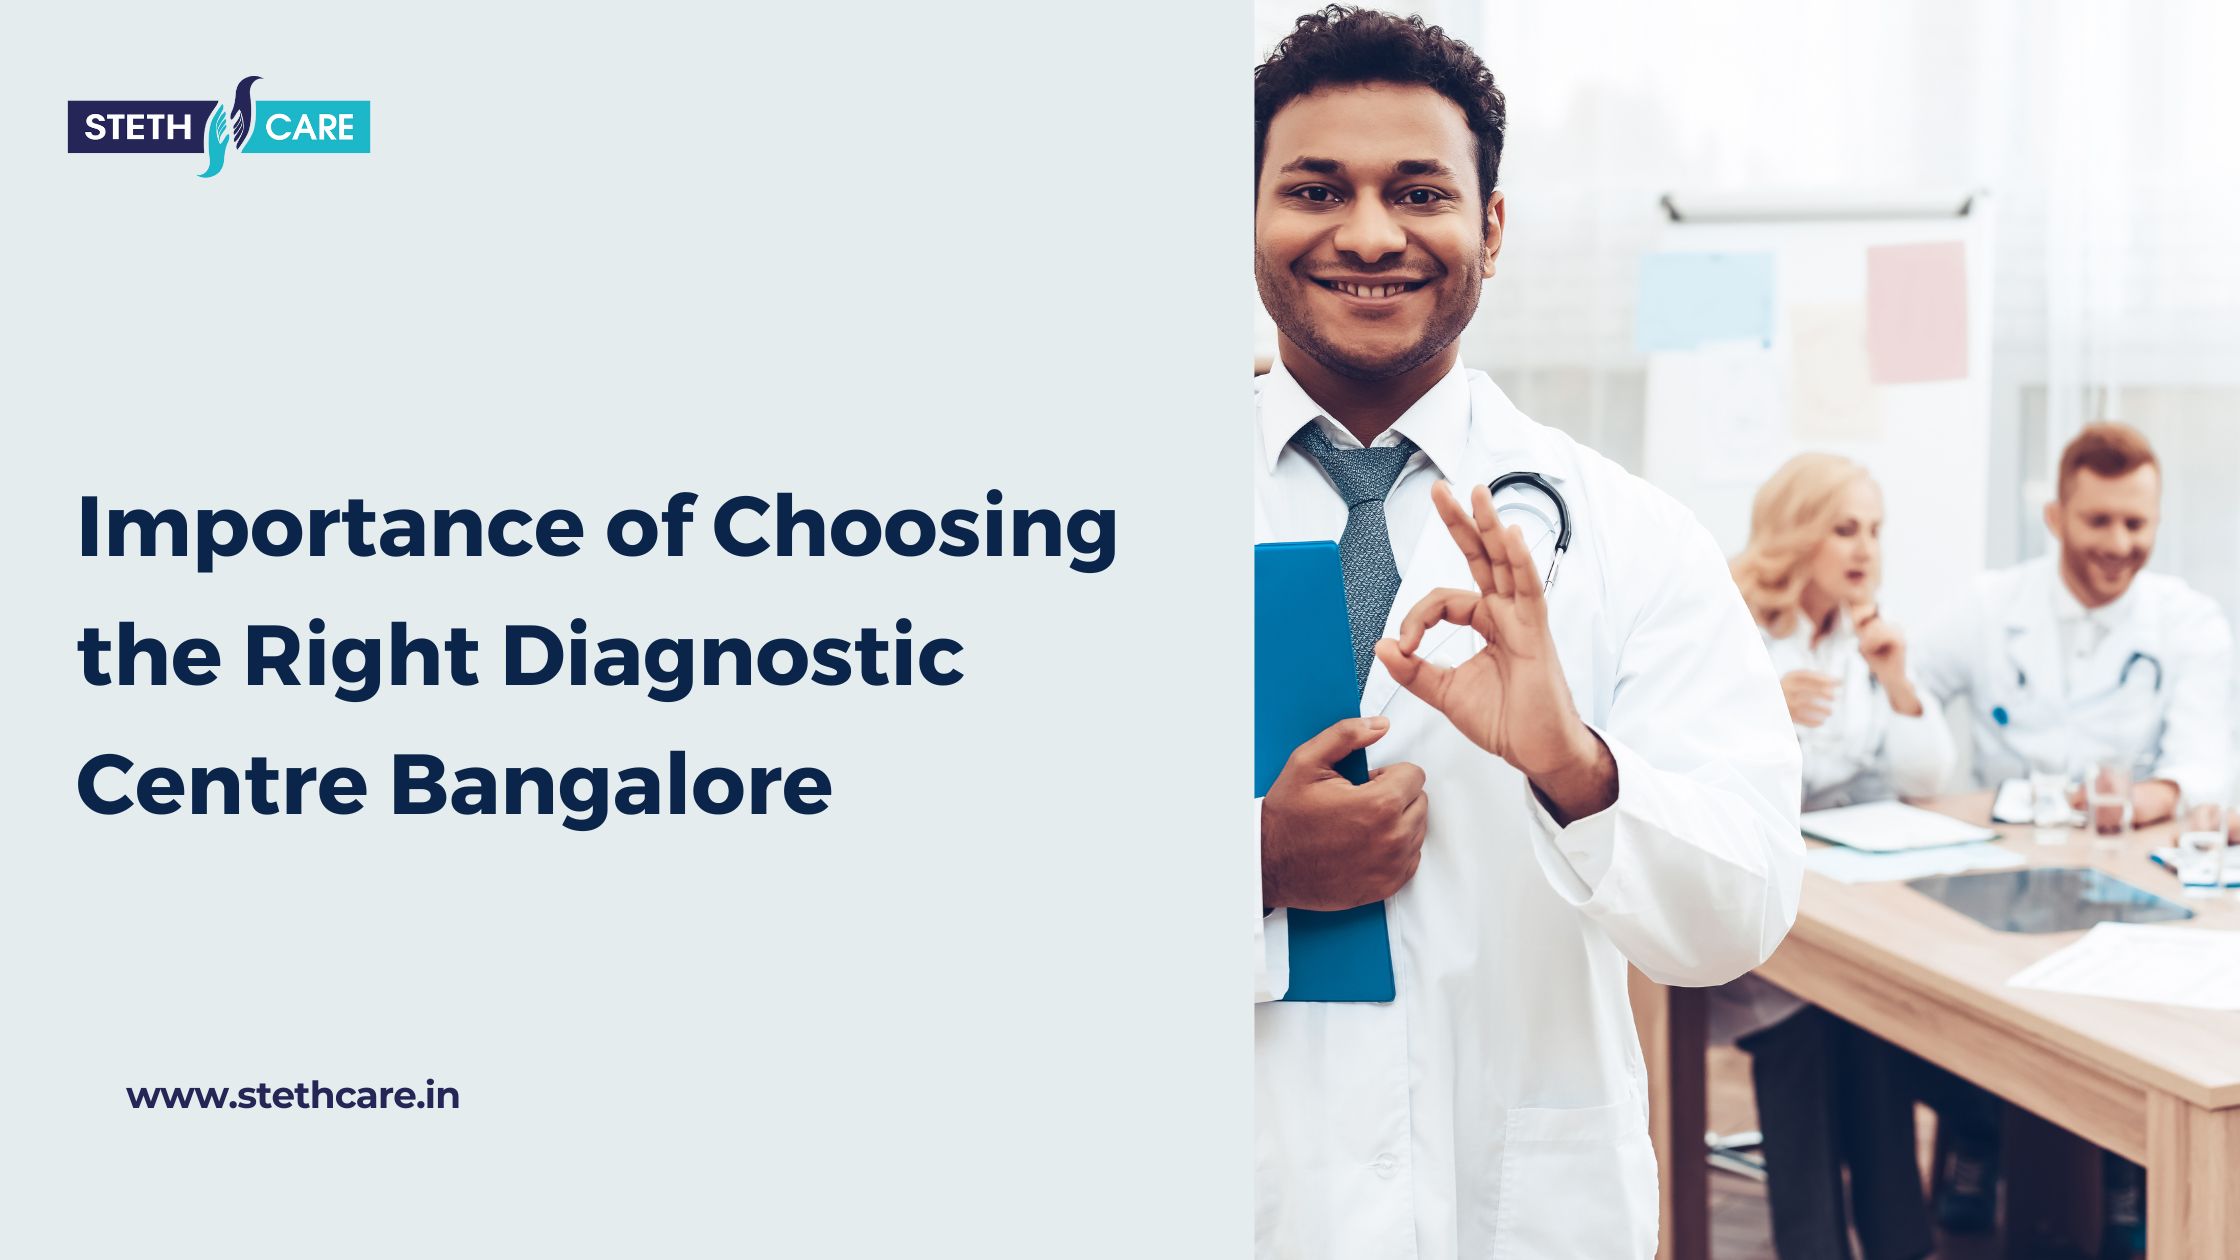 The Importance of Choosing the Right Diagnostic Centre Bangalore